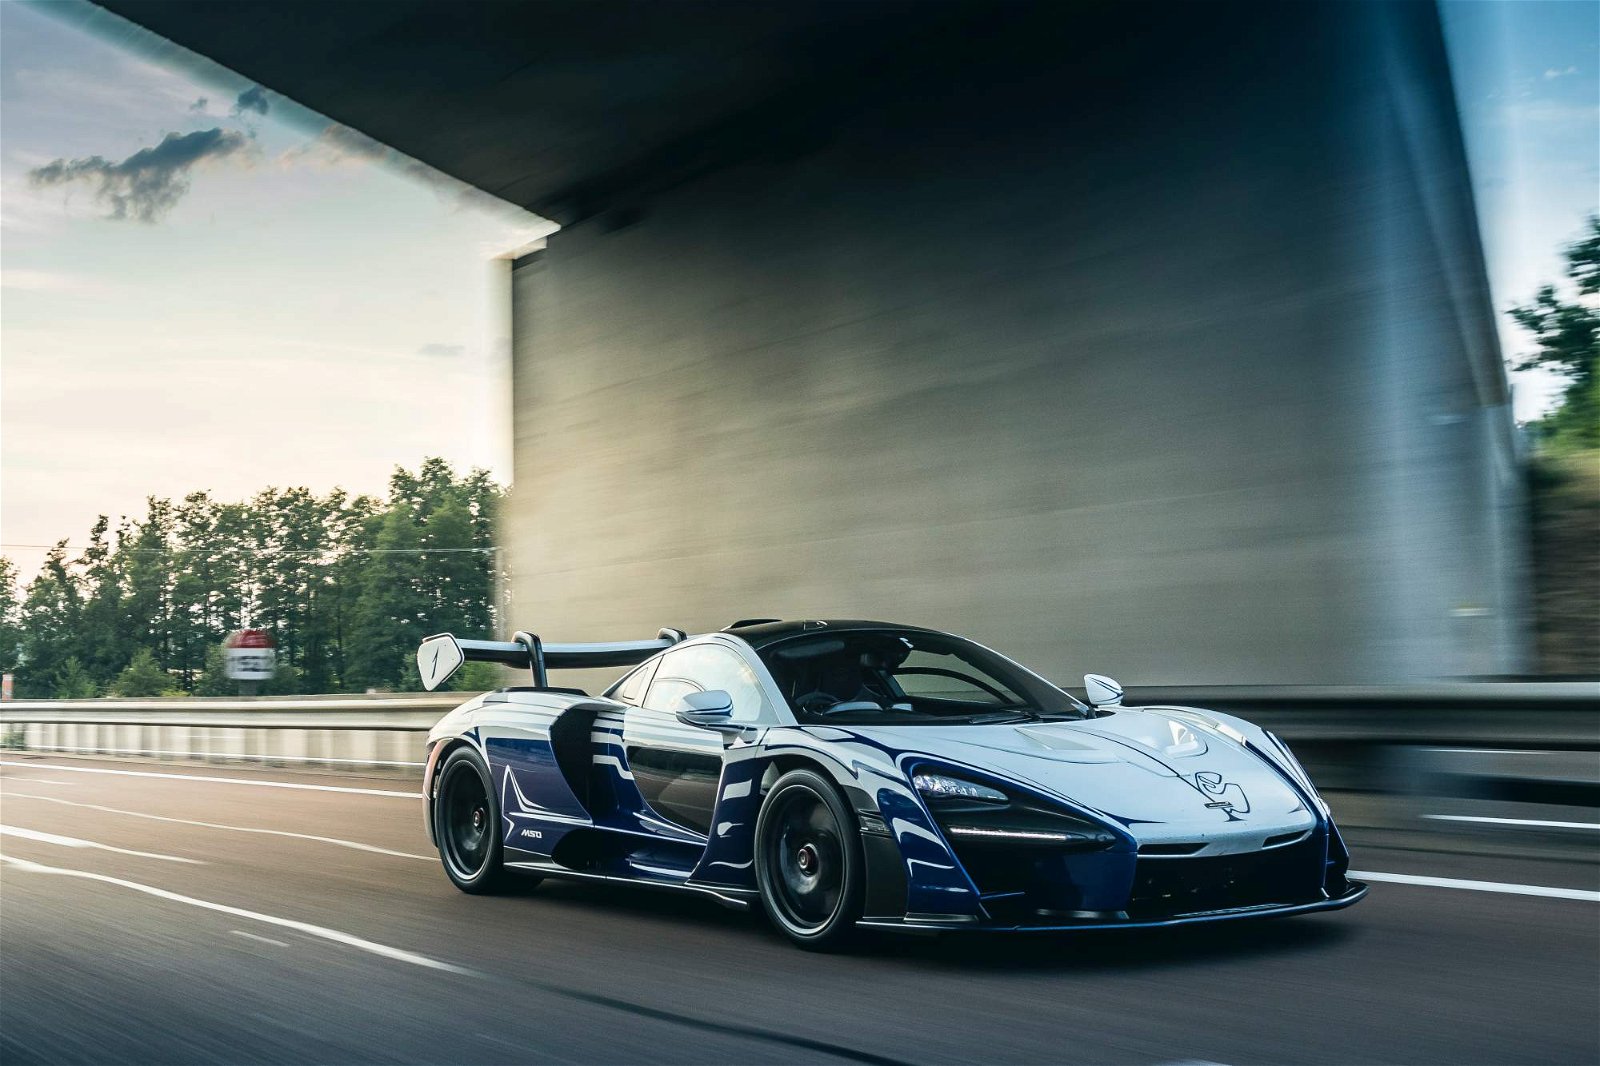 McLaren-Senna-chassis-001-on-maiden-road-trip-to-Paul-Ricard-circuit-17